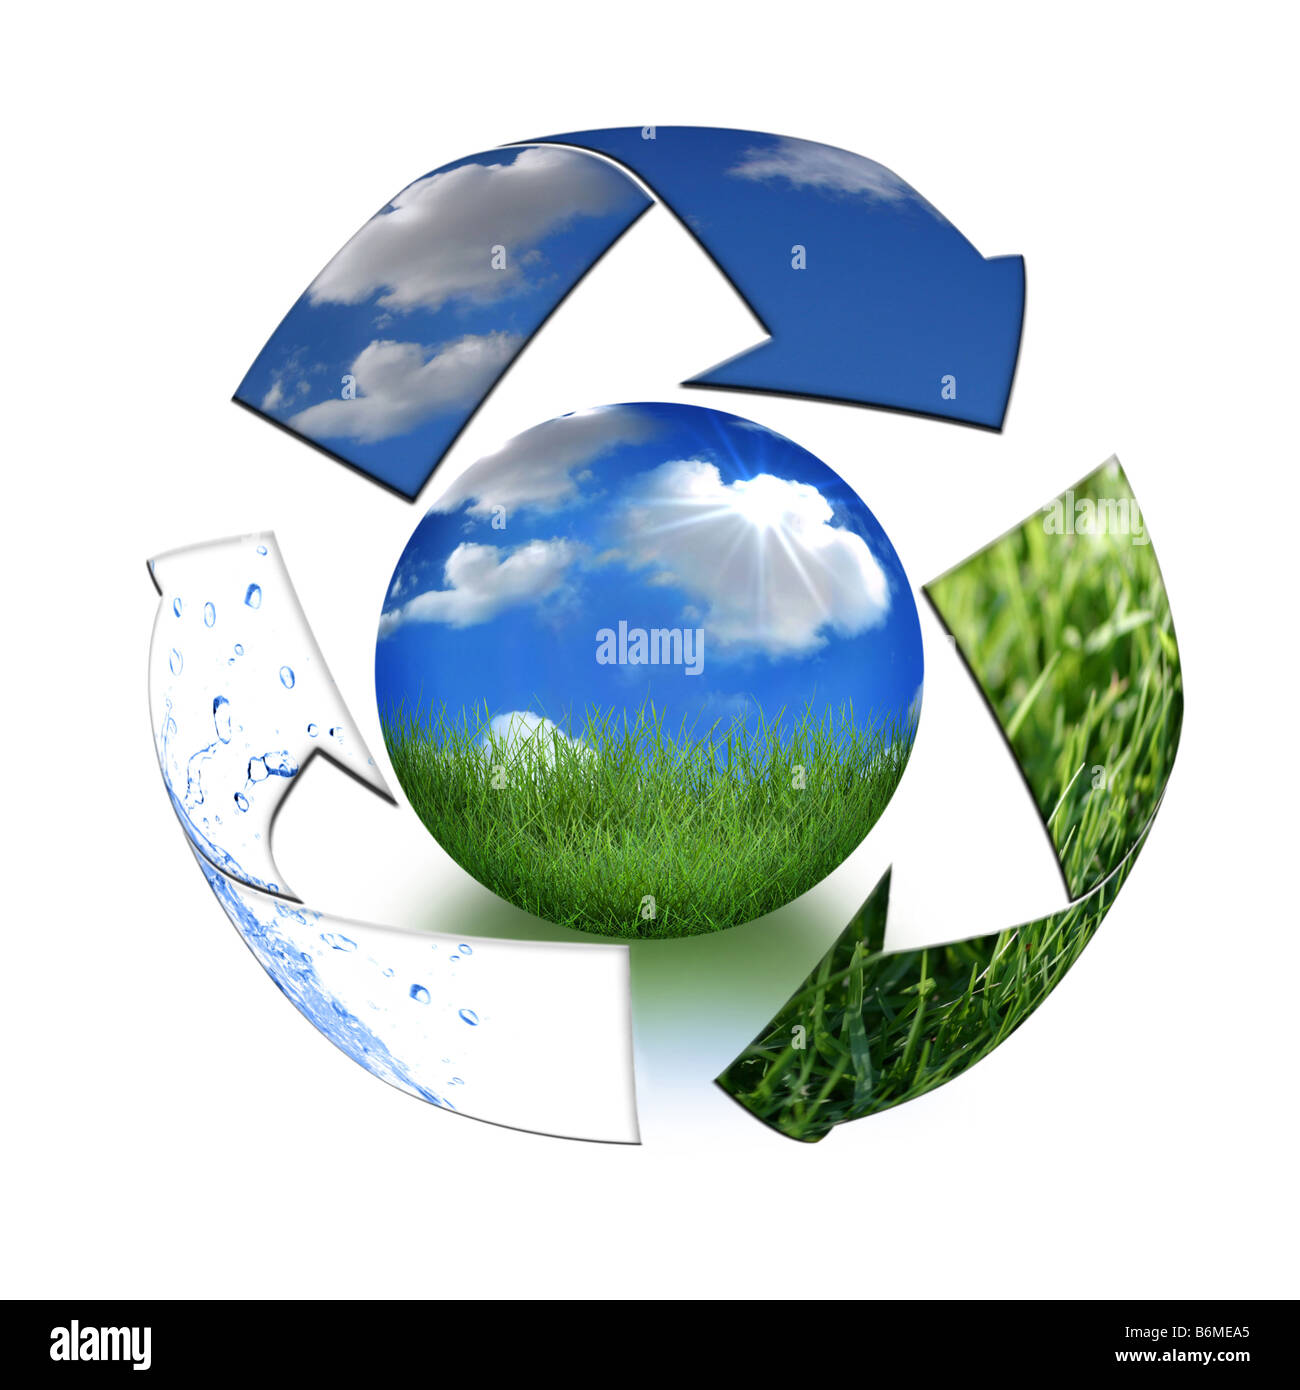 Abstract Recycling Symbol Representing Air Land and Sea Surrounding Planet Earth Stock Photo